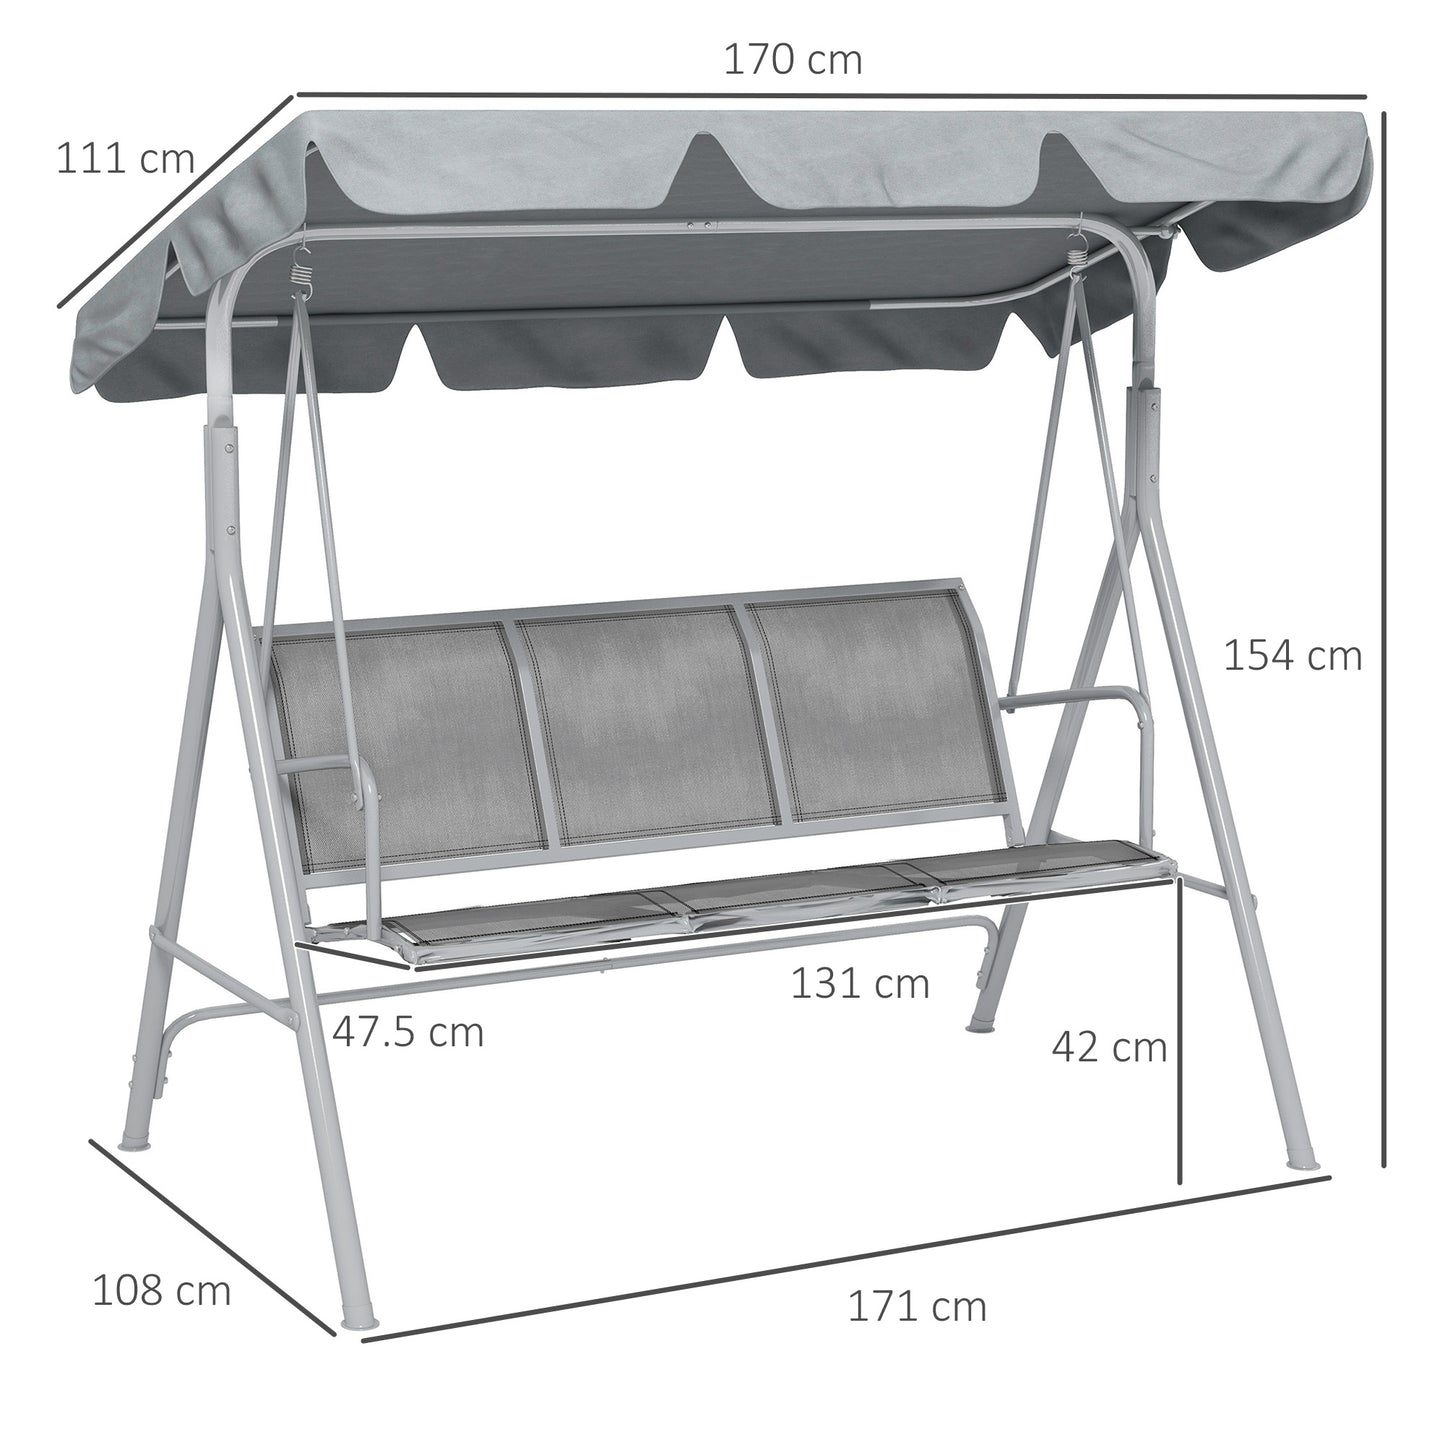 Outsunny Metal Garden Swing Chair, 3-Seater Swing Seat, Patio Hammock Bench Canopy Lounger, Light Grey